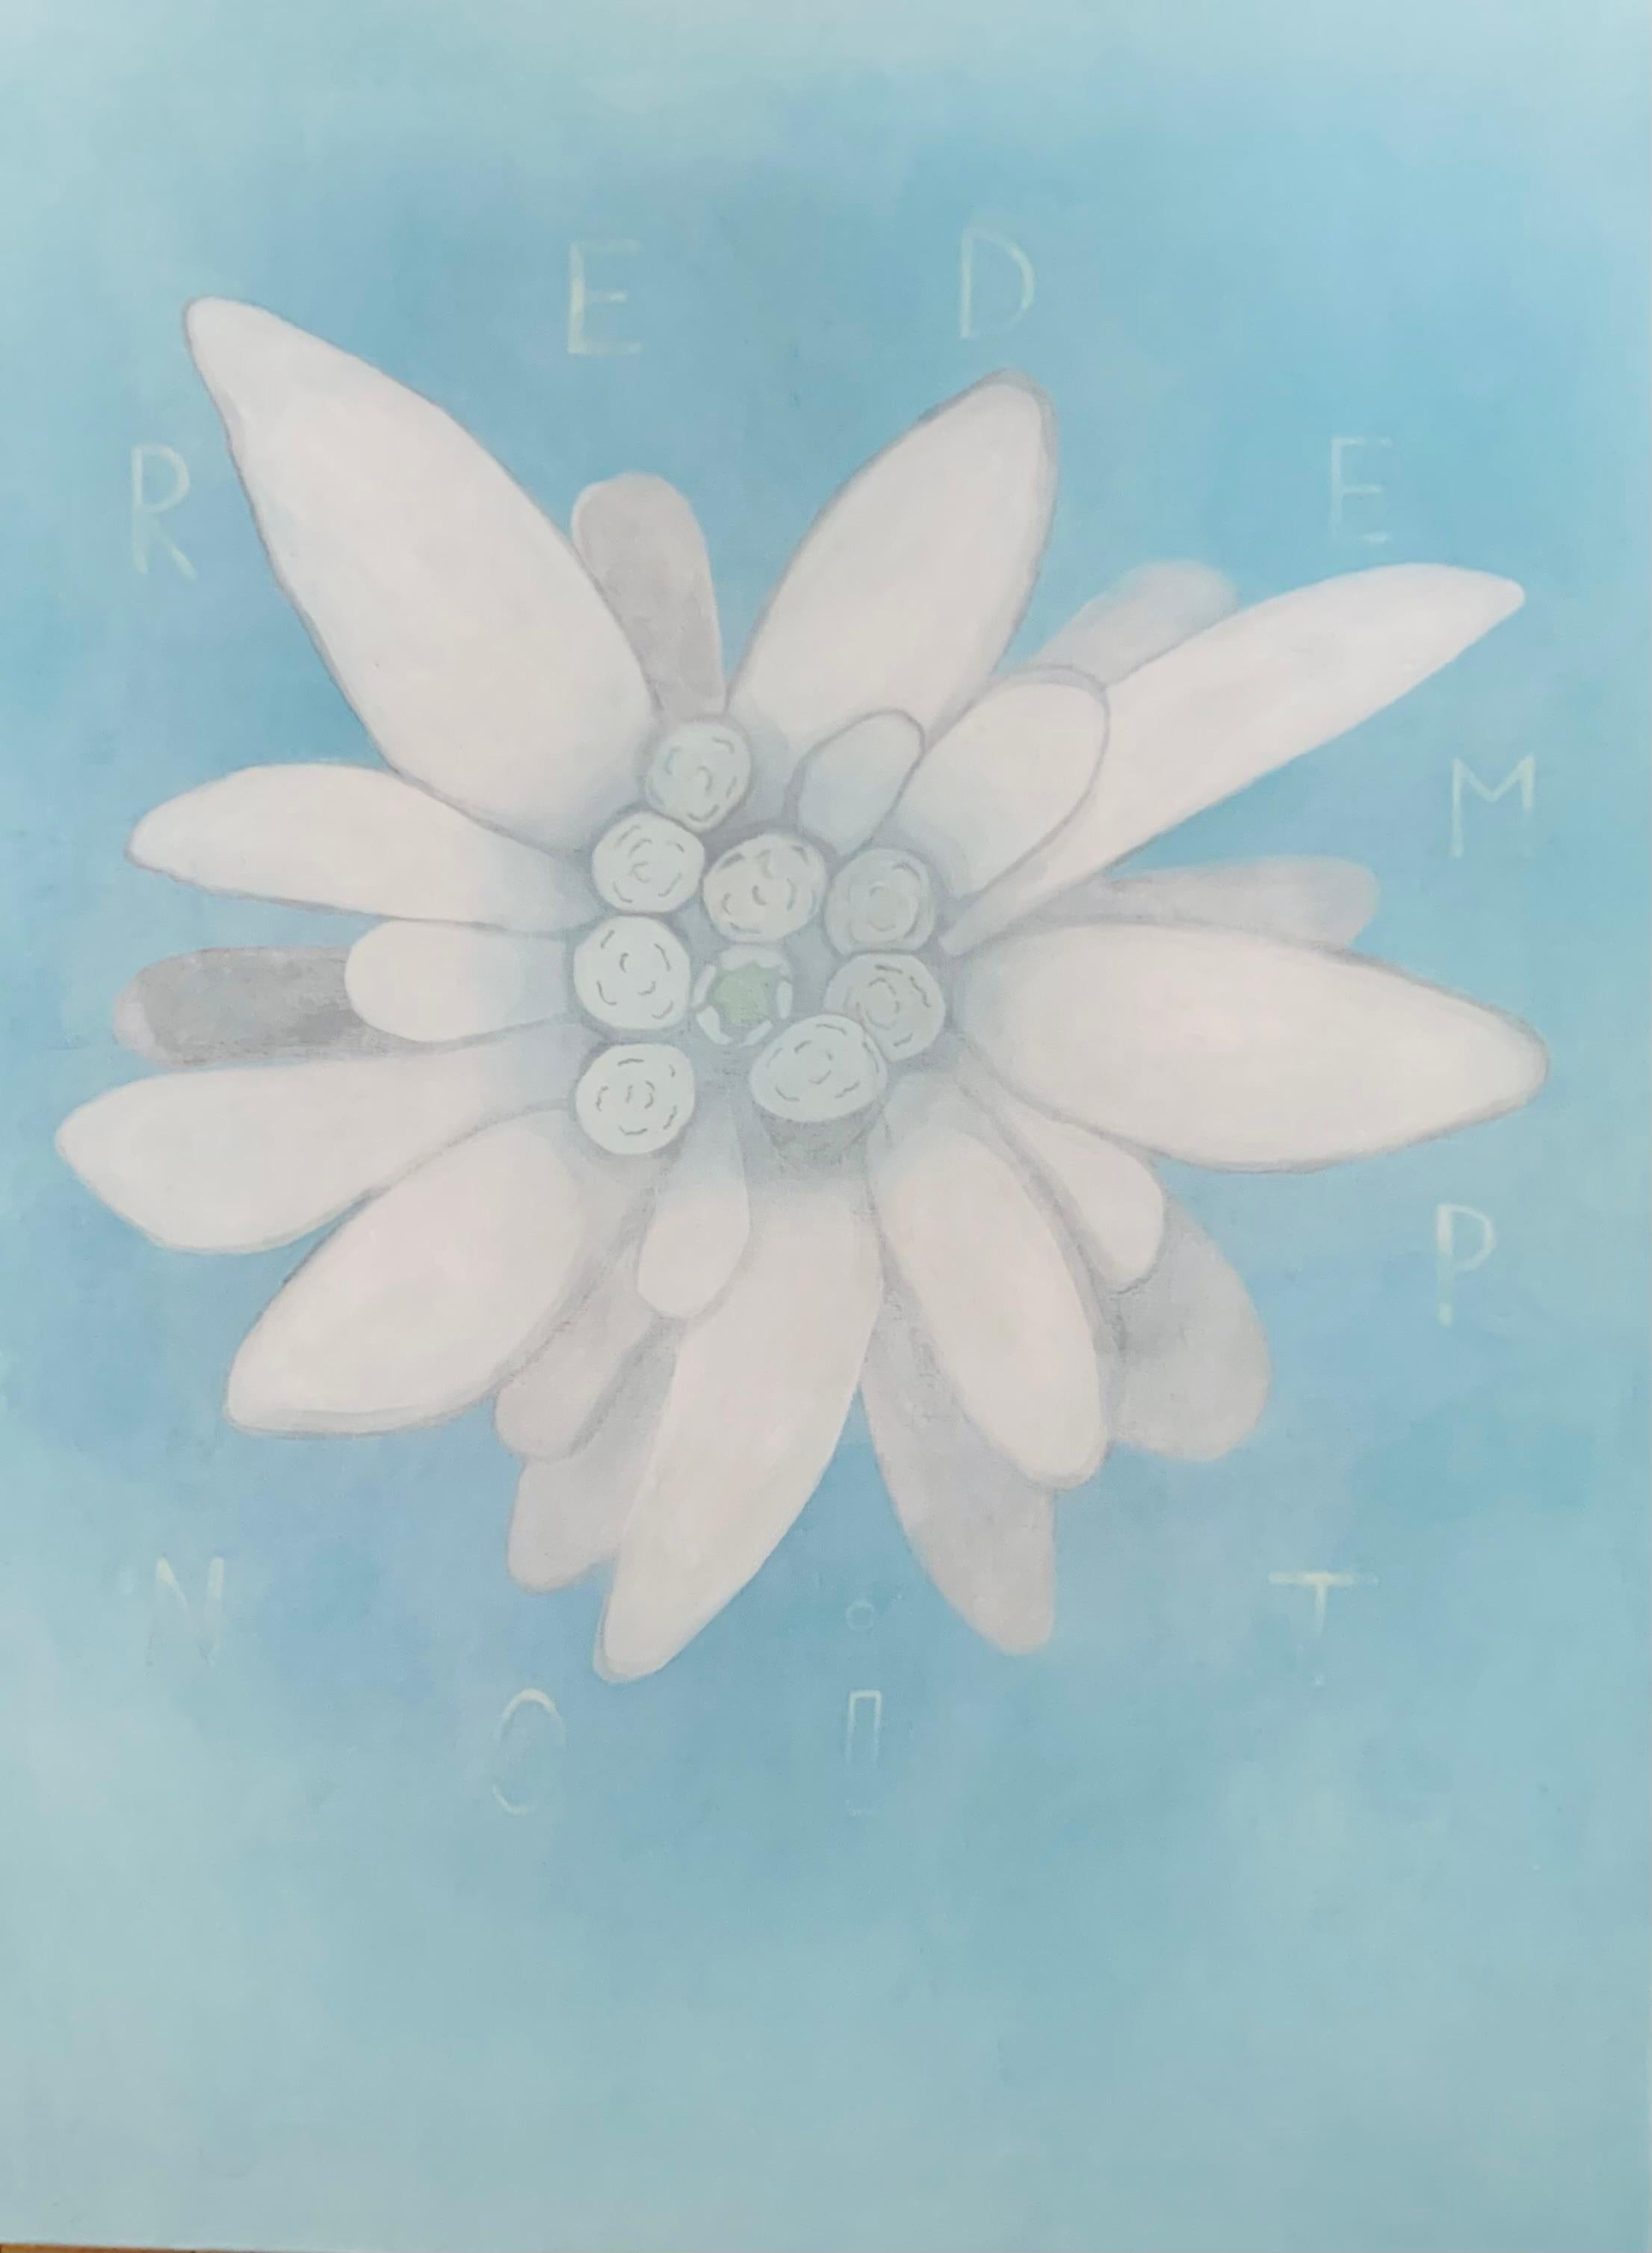 Aleksandra Bujnowska Abstract Painting - LIKE EDELWEISS - Contemporary Flower Oil Painting, Soft Pastel Colors